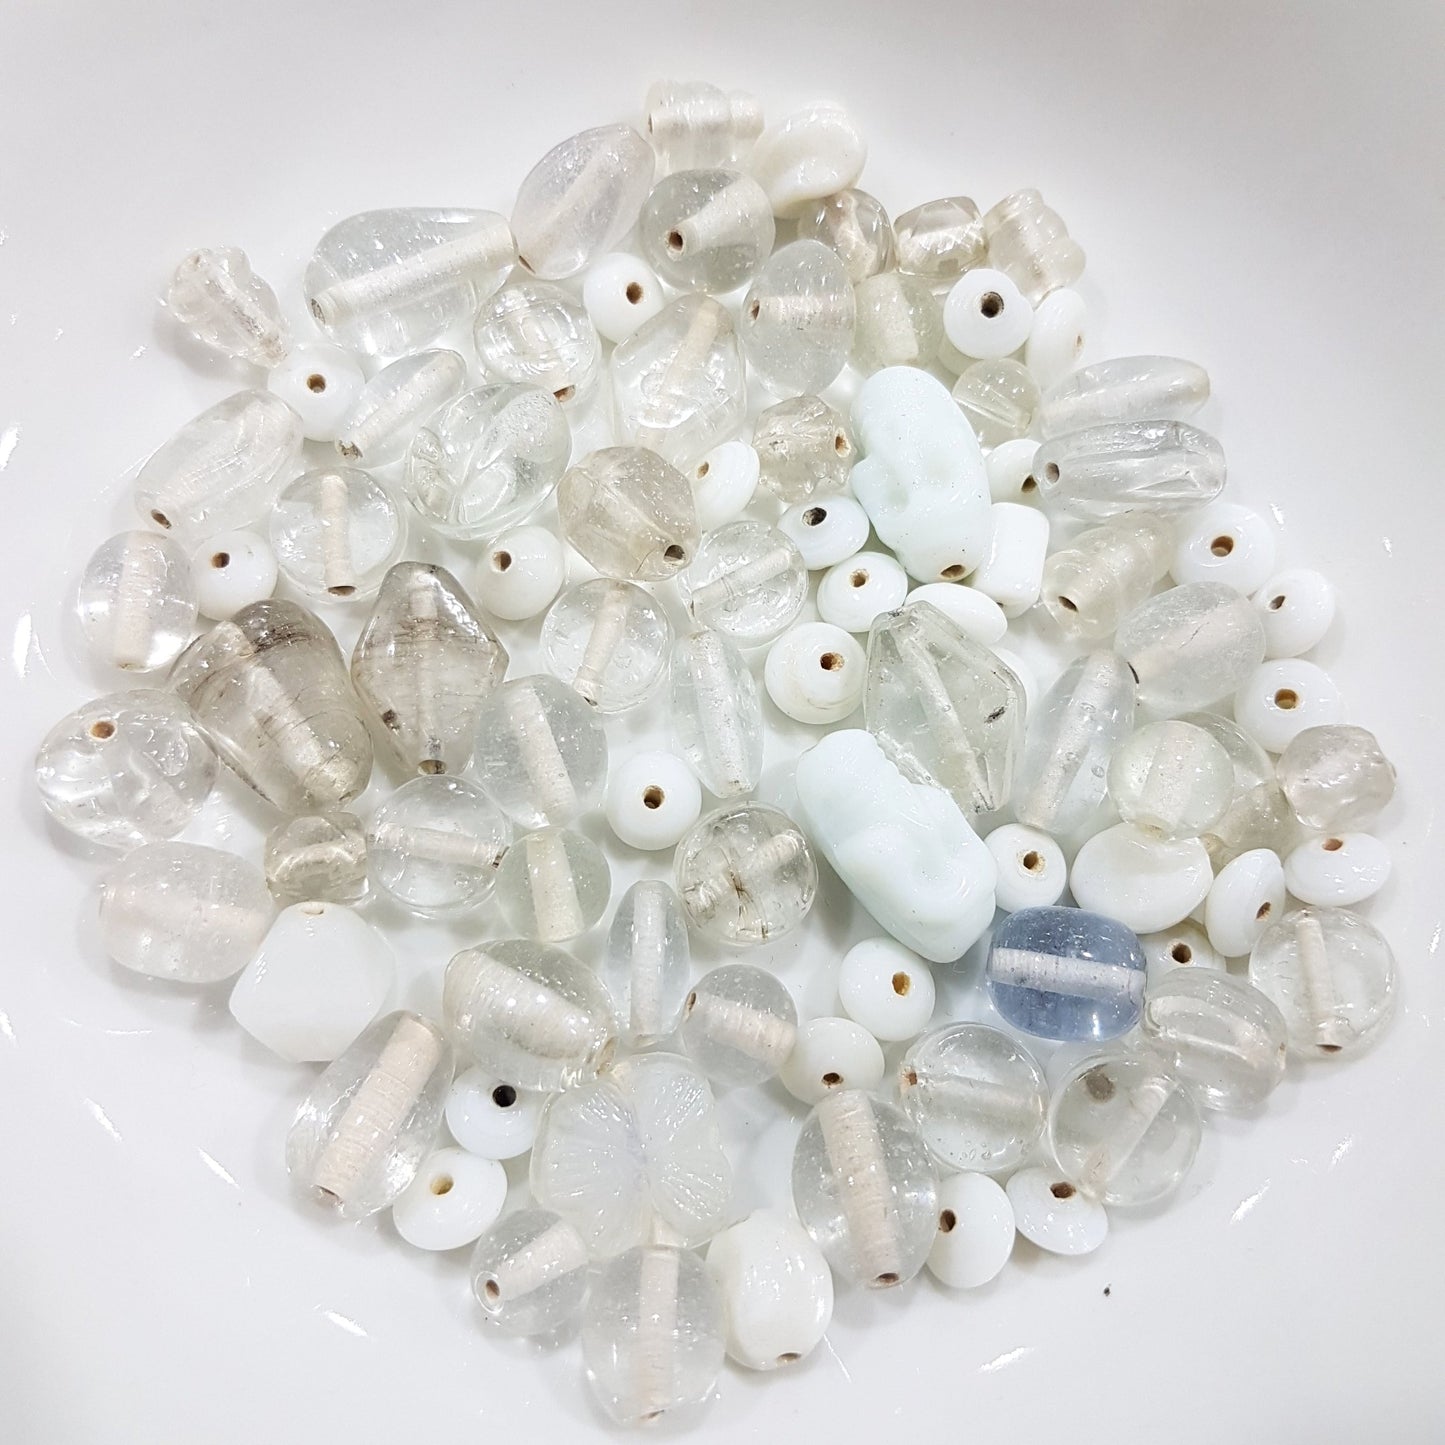 100g Clear and White Lampwork Mix